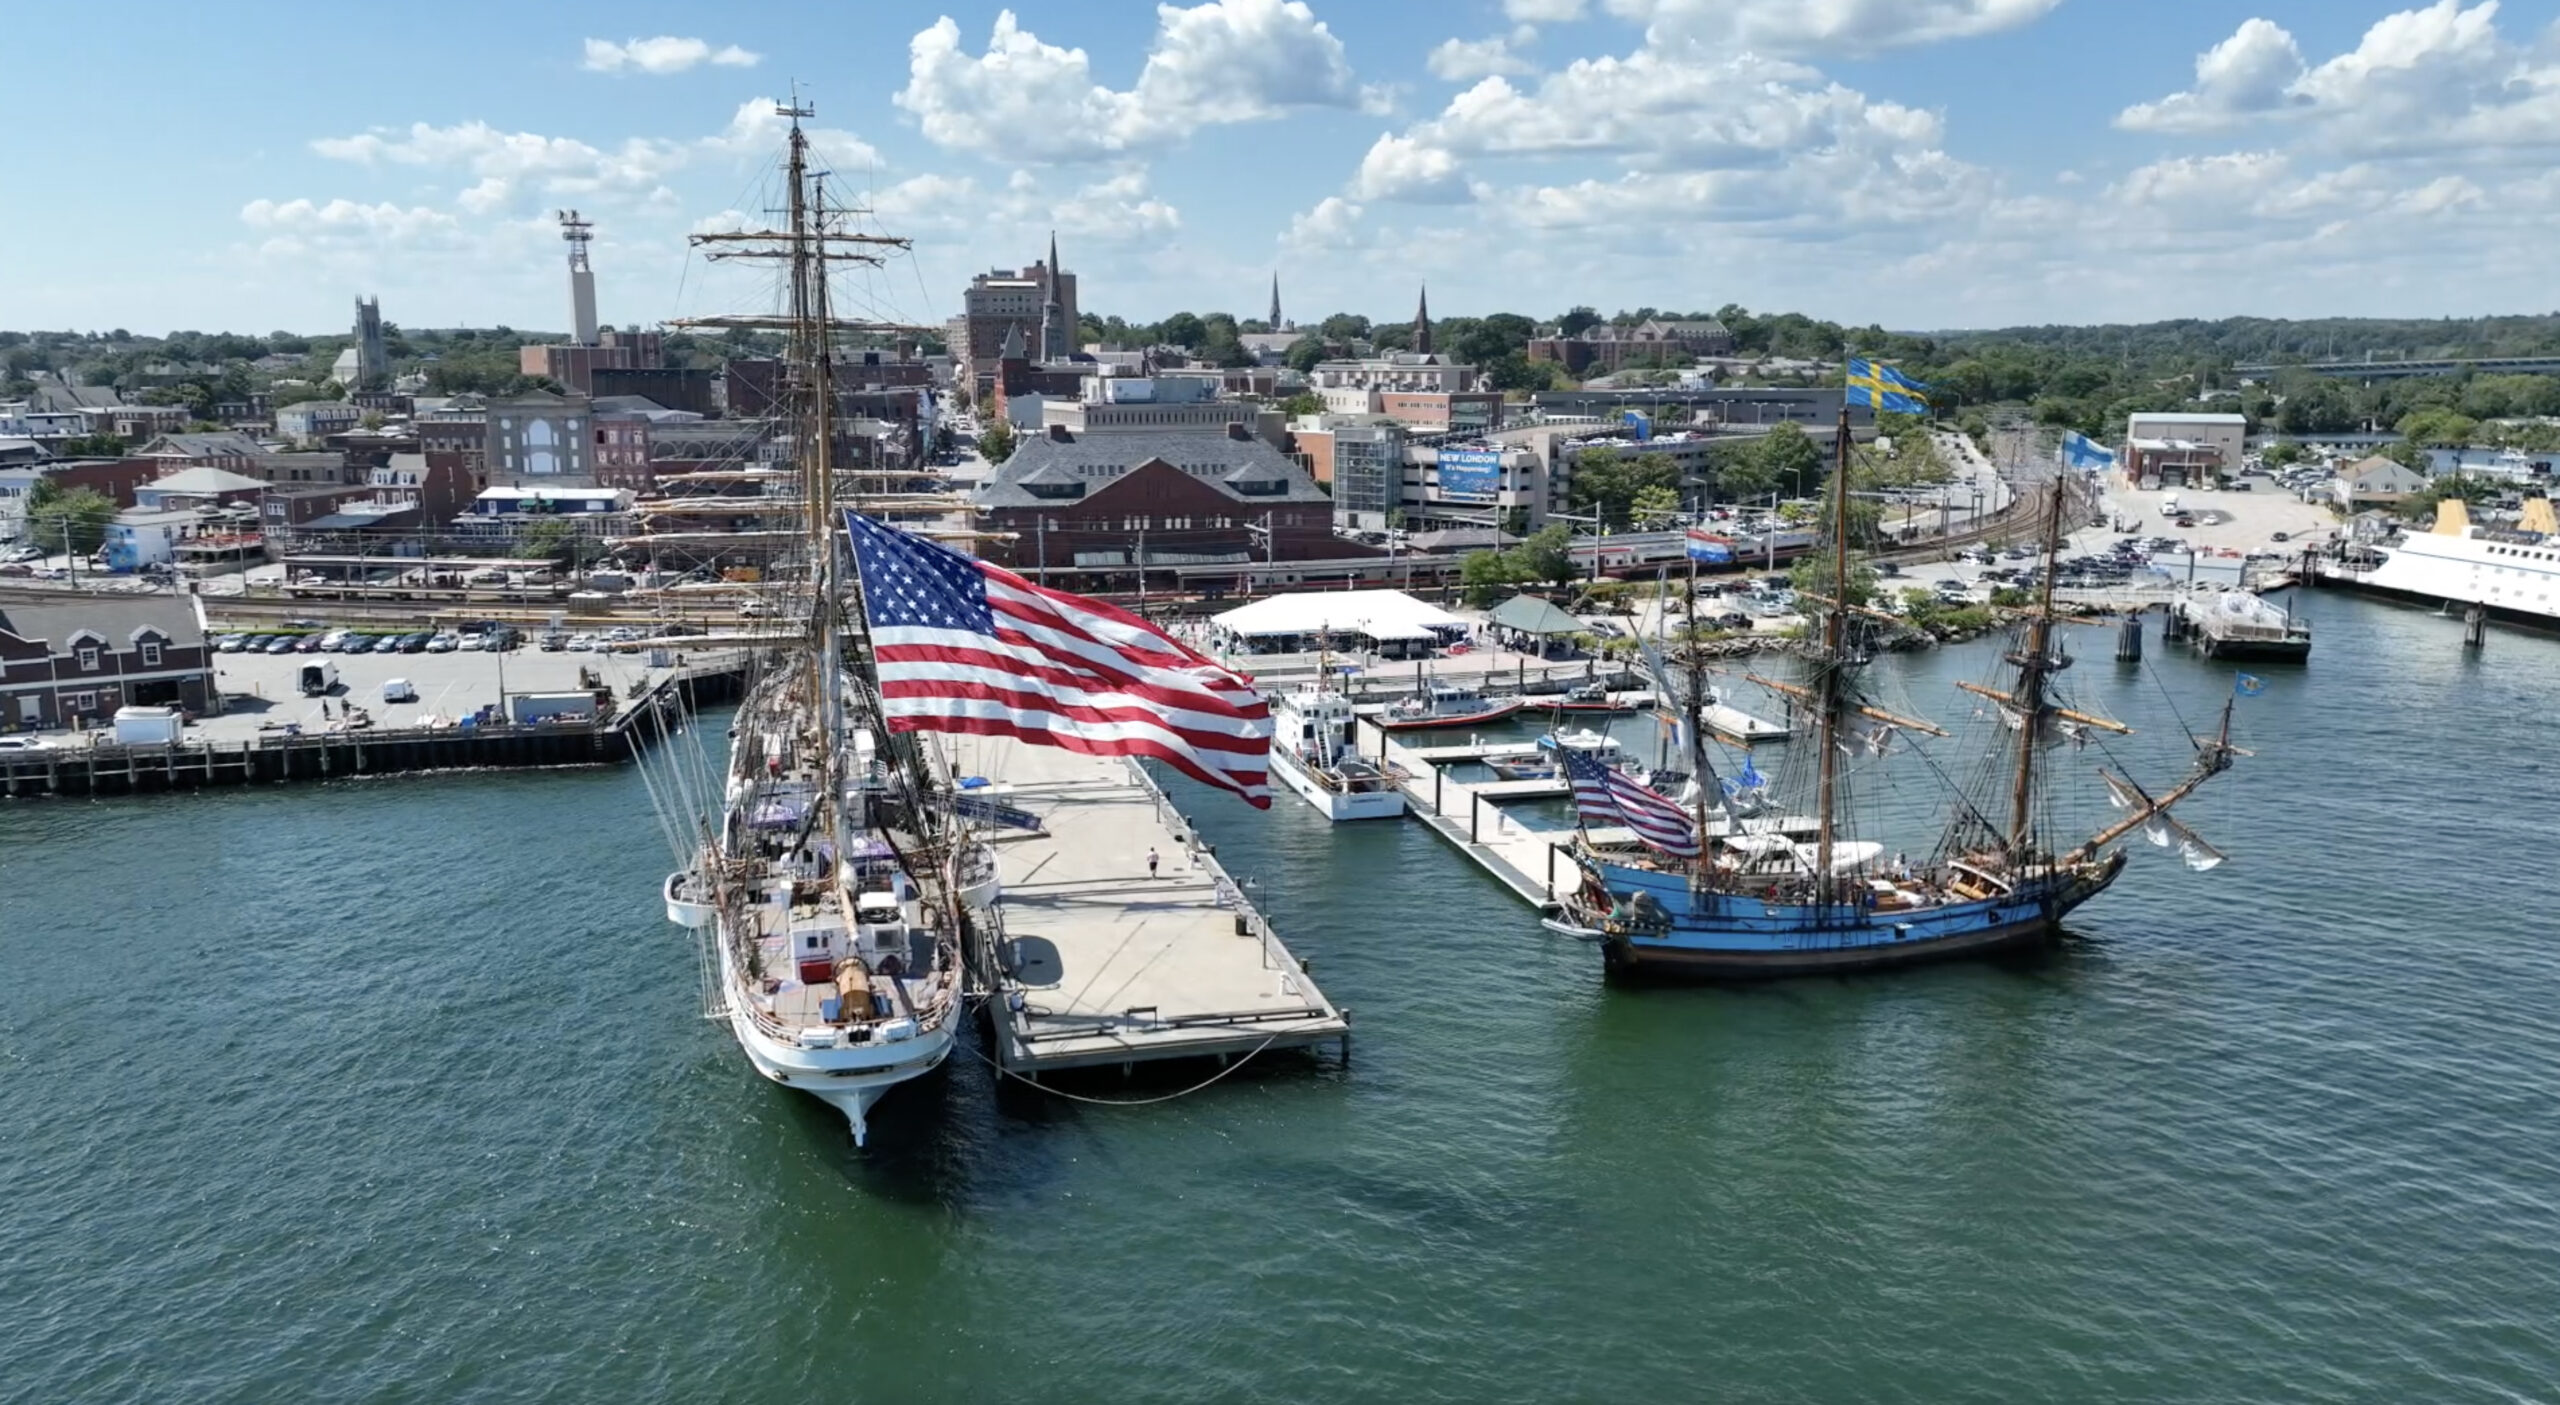 Color (water view - Aerial) photograph of Keel Laying Ceremony and Construction Site with America's Tall Ship the Coast Guard Cutter Eagle moored pierside. A very large Americal flag is flying.